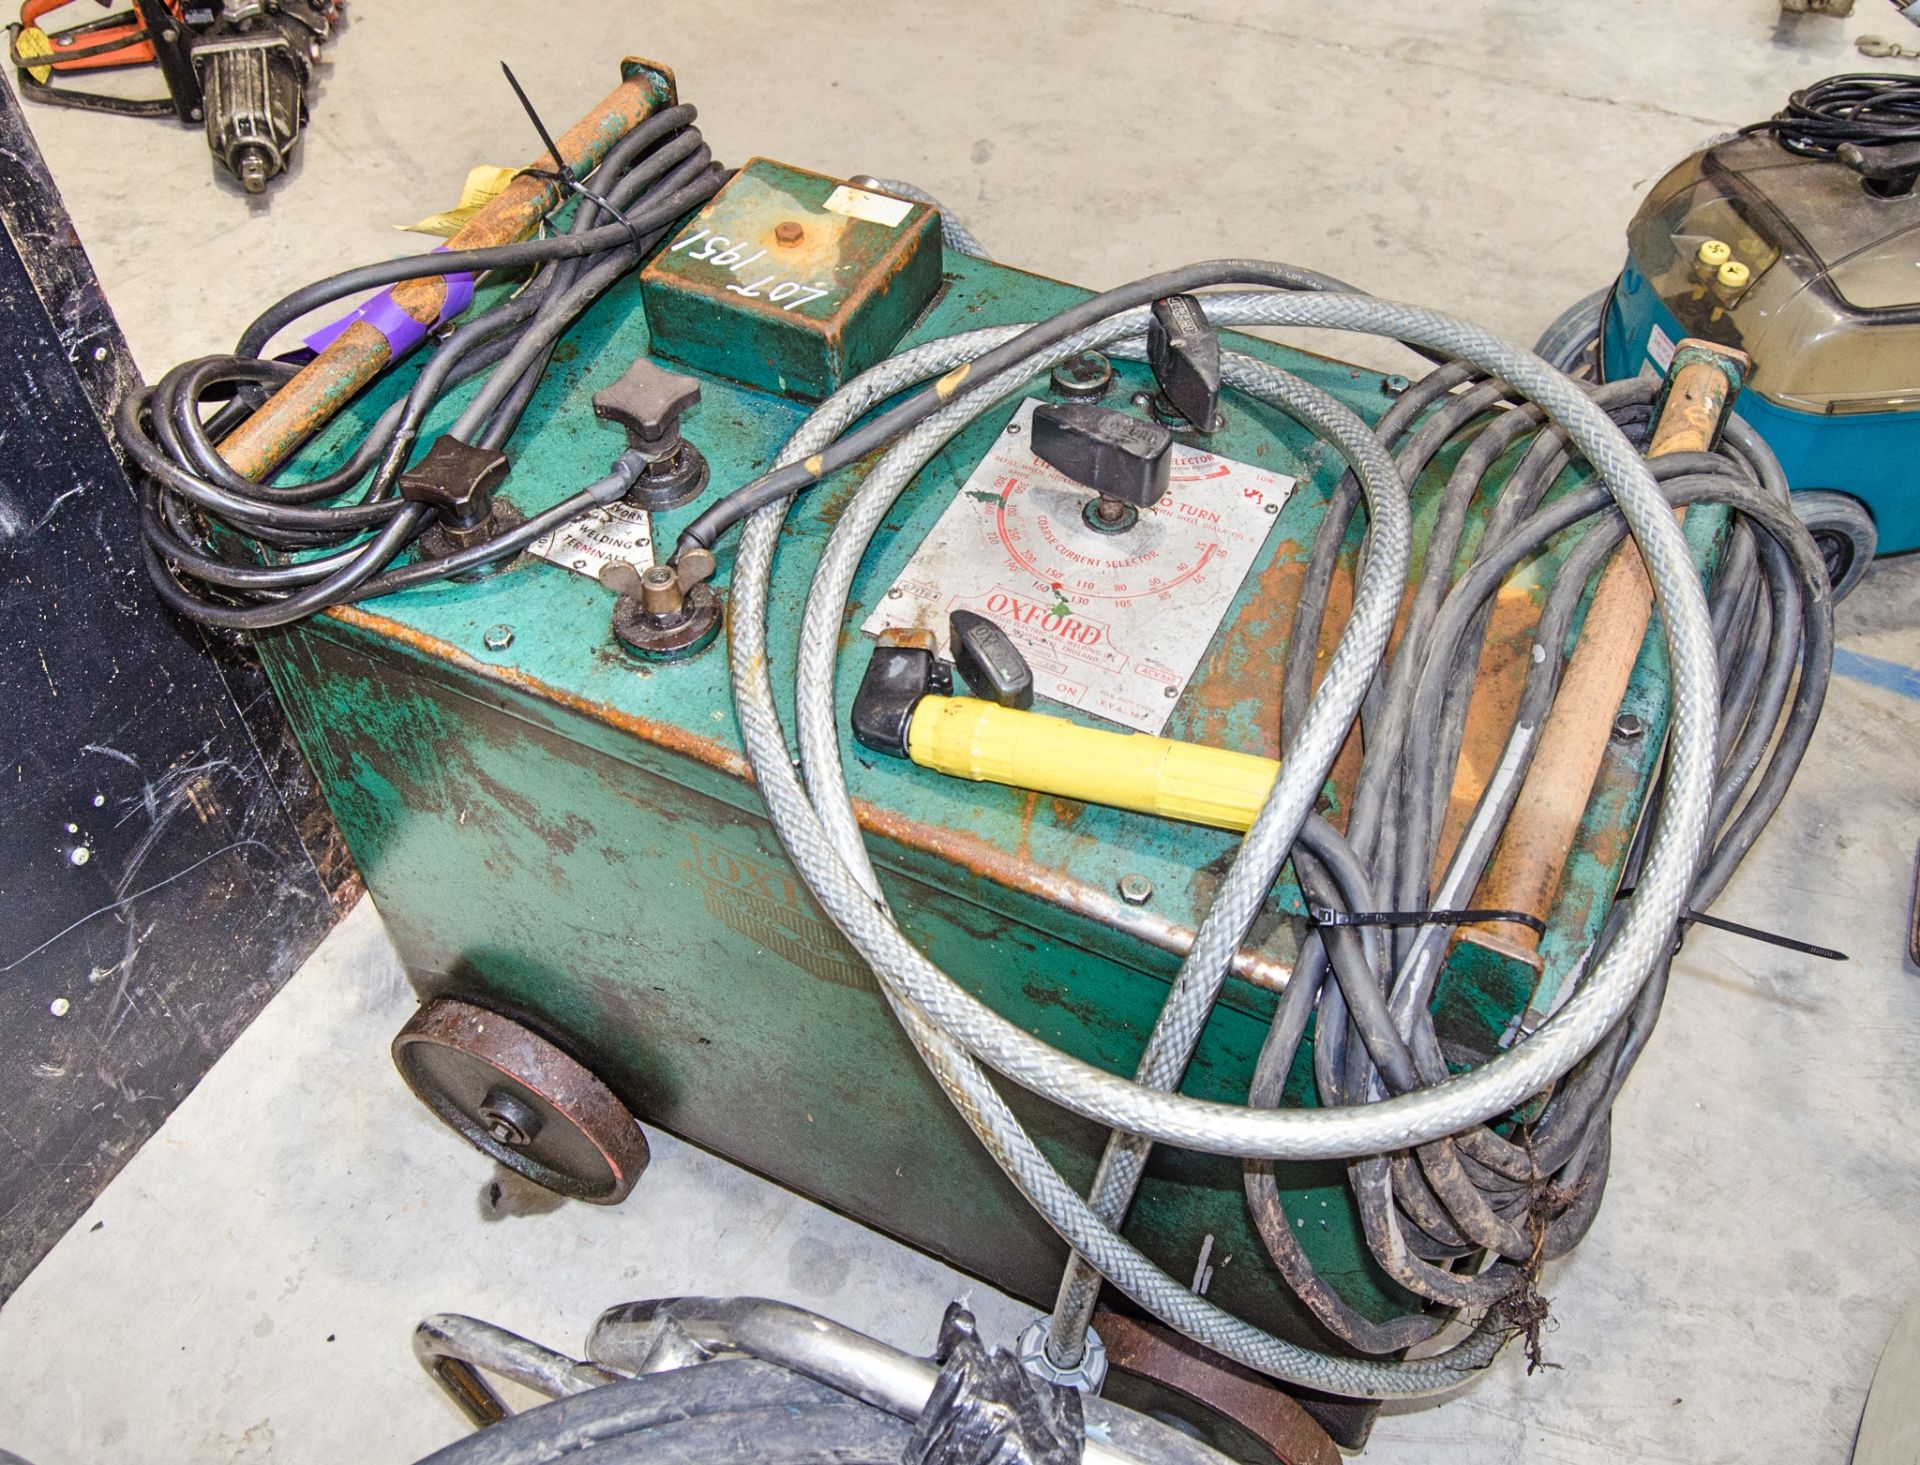 Oxford 3 phase arc welding set N1104917 - Image 2 of 2